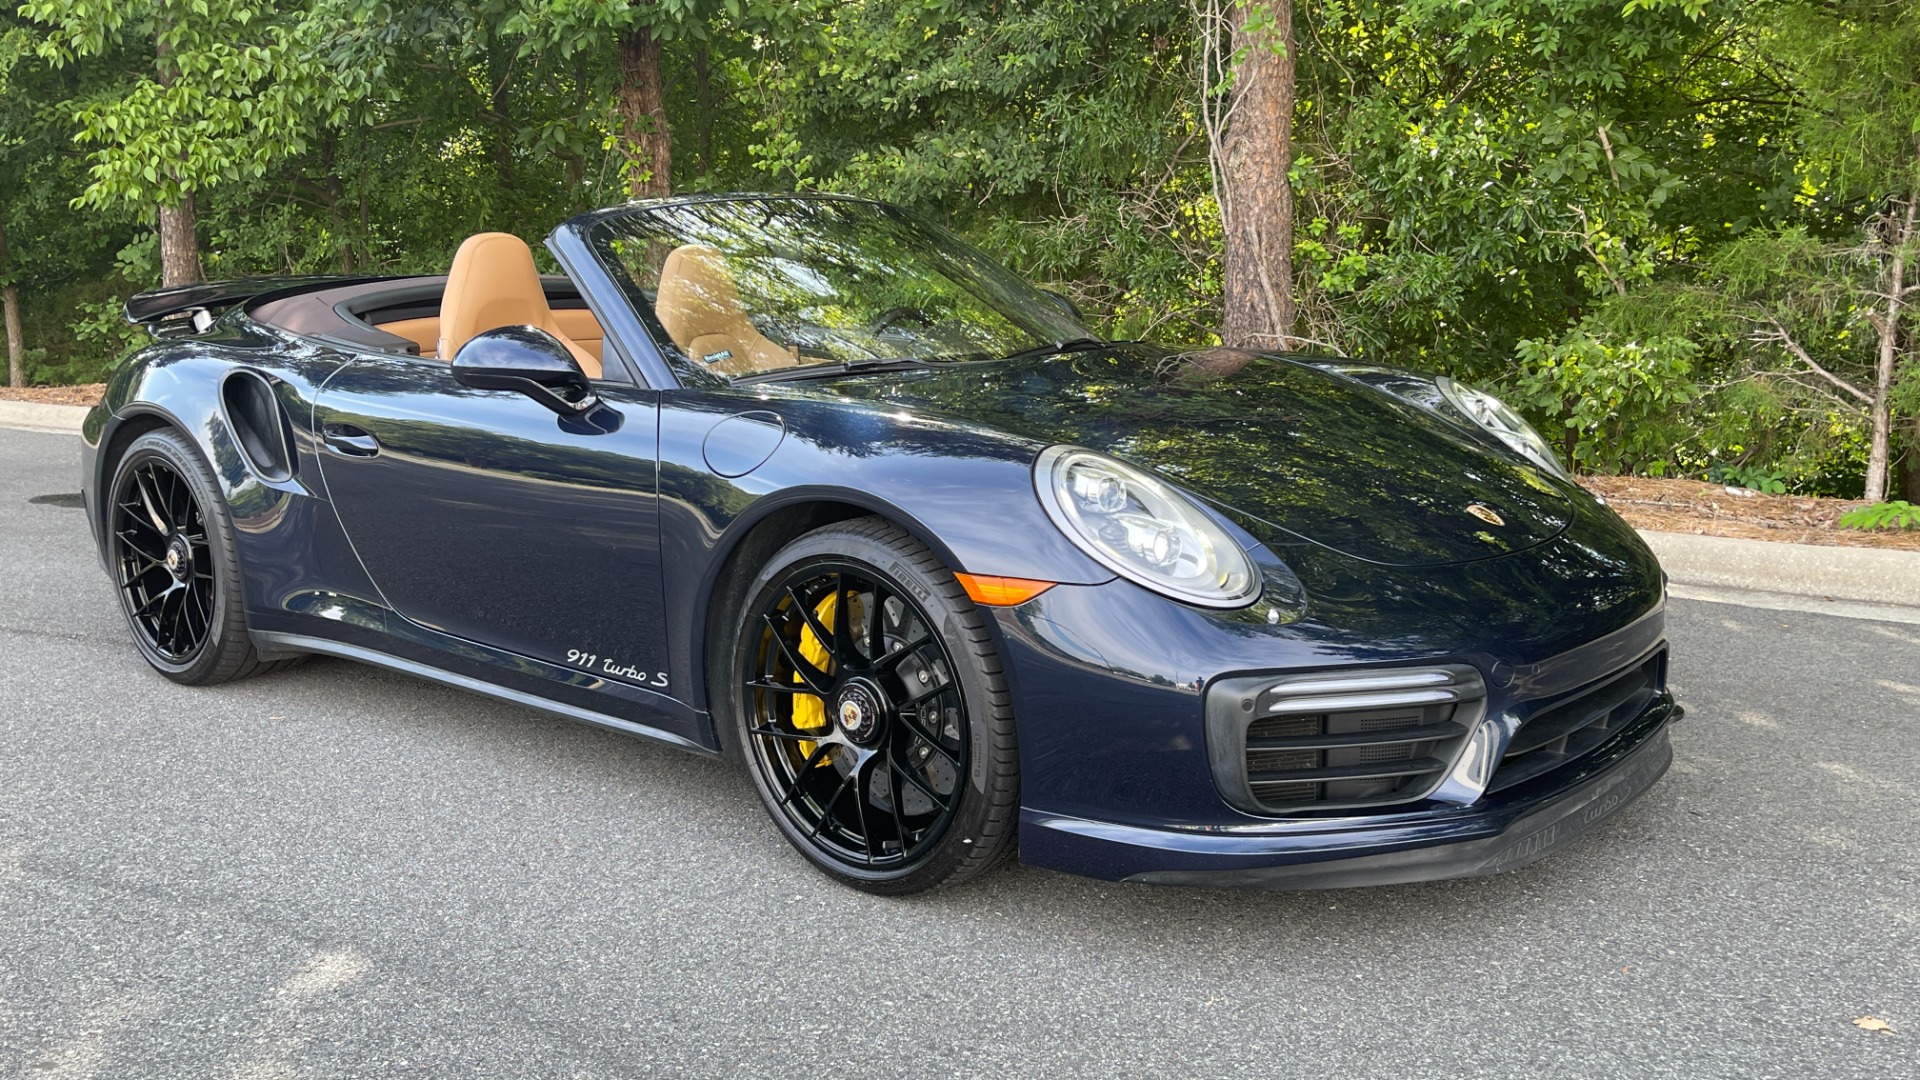 Used 2017 Porsche 911 Turbo S / CABRIOLET / FRONT LIFT / PDK / 20IN WHEELS for sale $179,999 at Formula Imports in Charlotte NC 28227 9